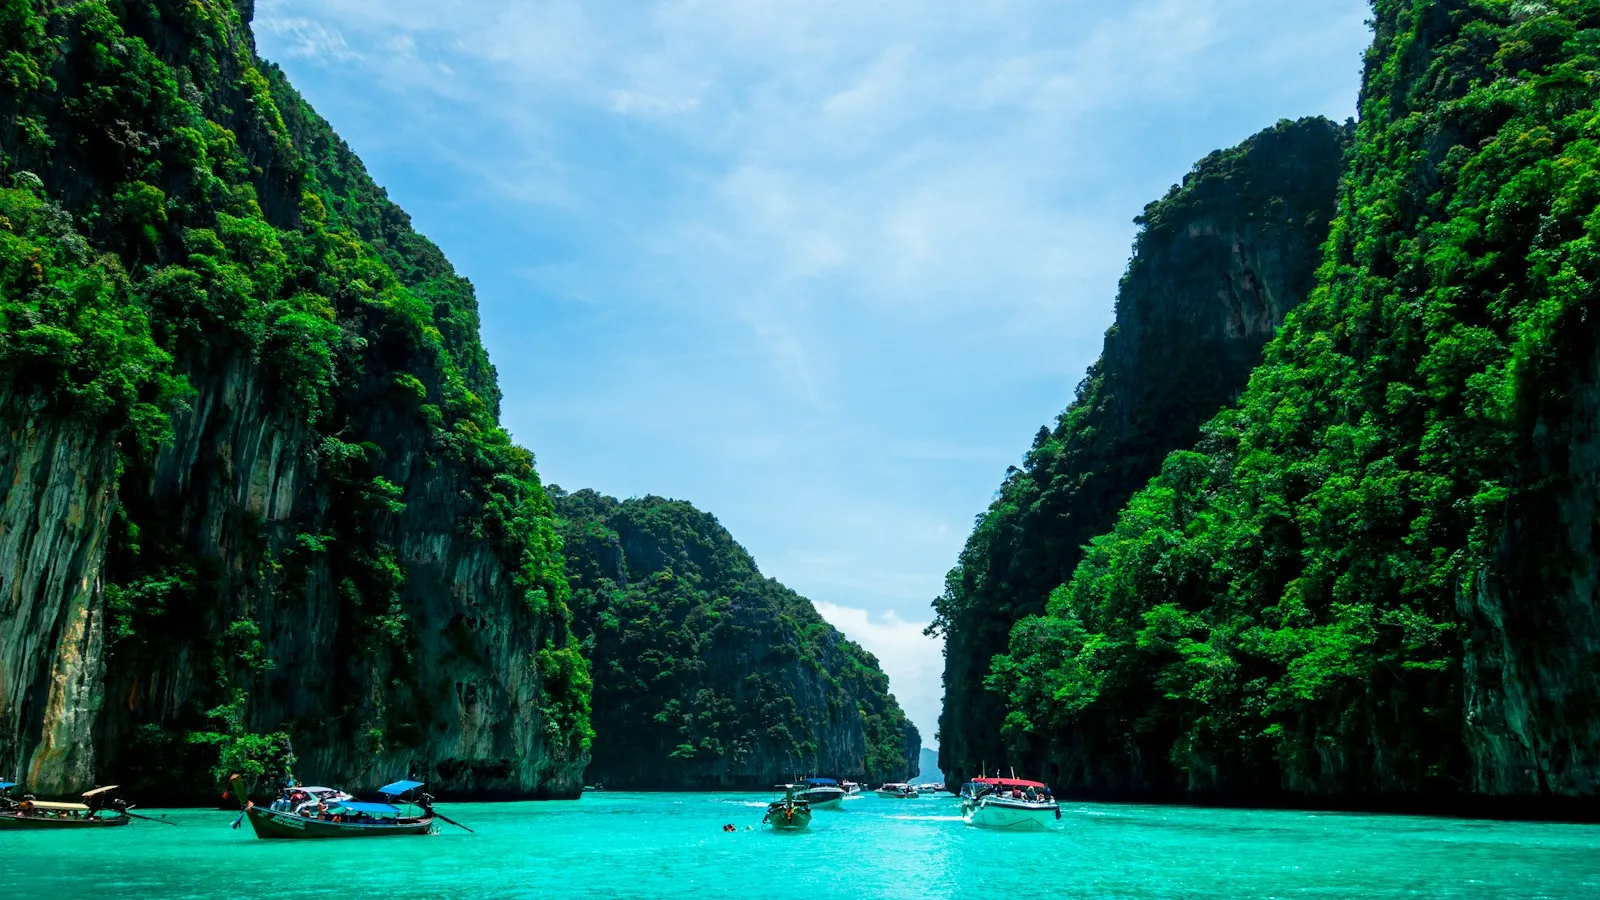 Discover the most common scams in Phuket that target unsuspecting tourists and learn how to safeguard yourself from falling victim to these deceitful practices.